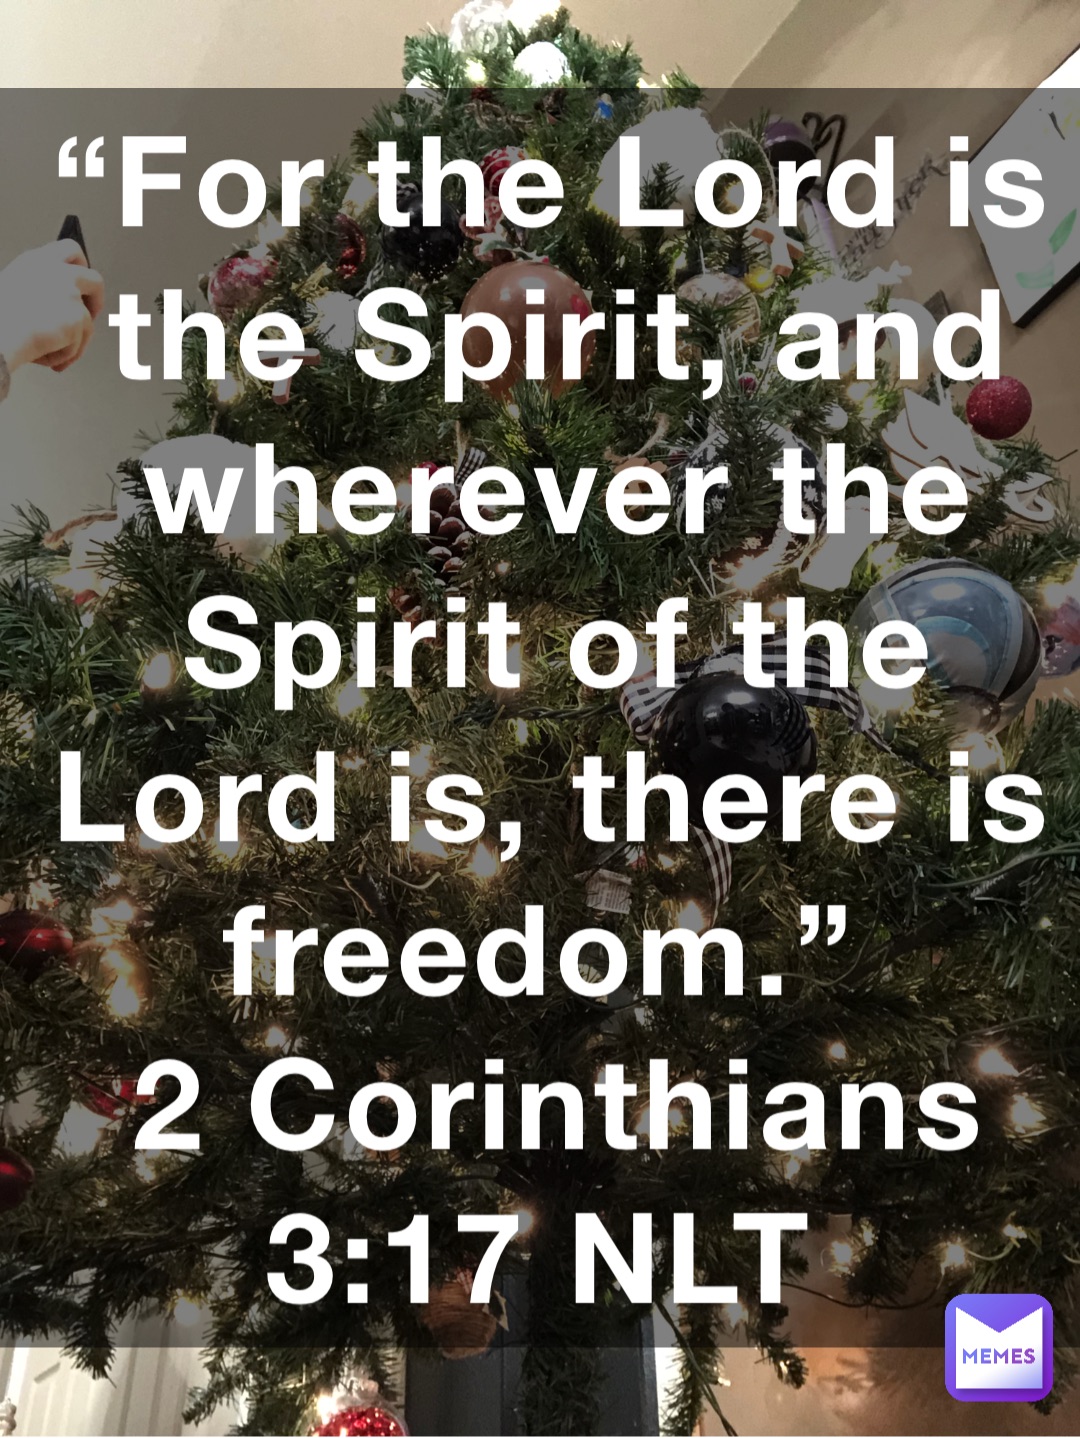 “For the Lord is the Spirit, and wherever the Spirit of the Lord is, there is freedom.”
‭‭2 Corinthians‬ ‭3‬:‭17‬ ‭NLT‬‬